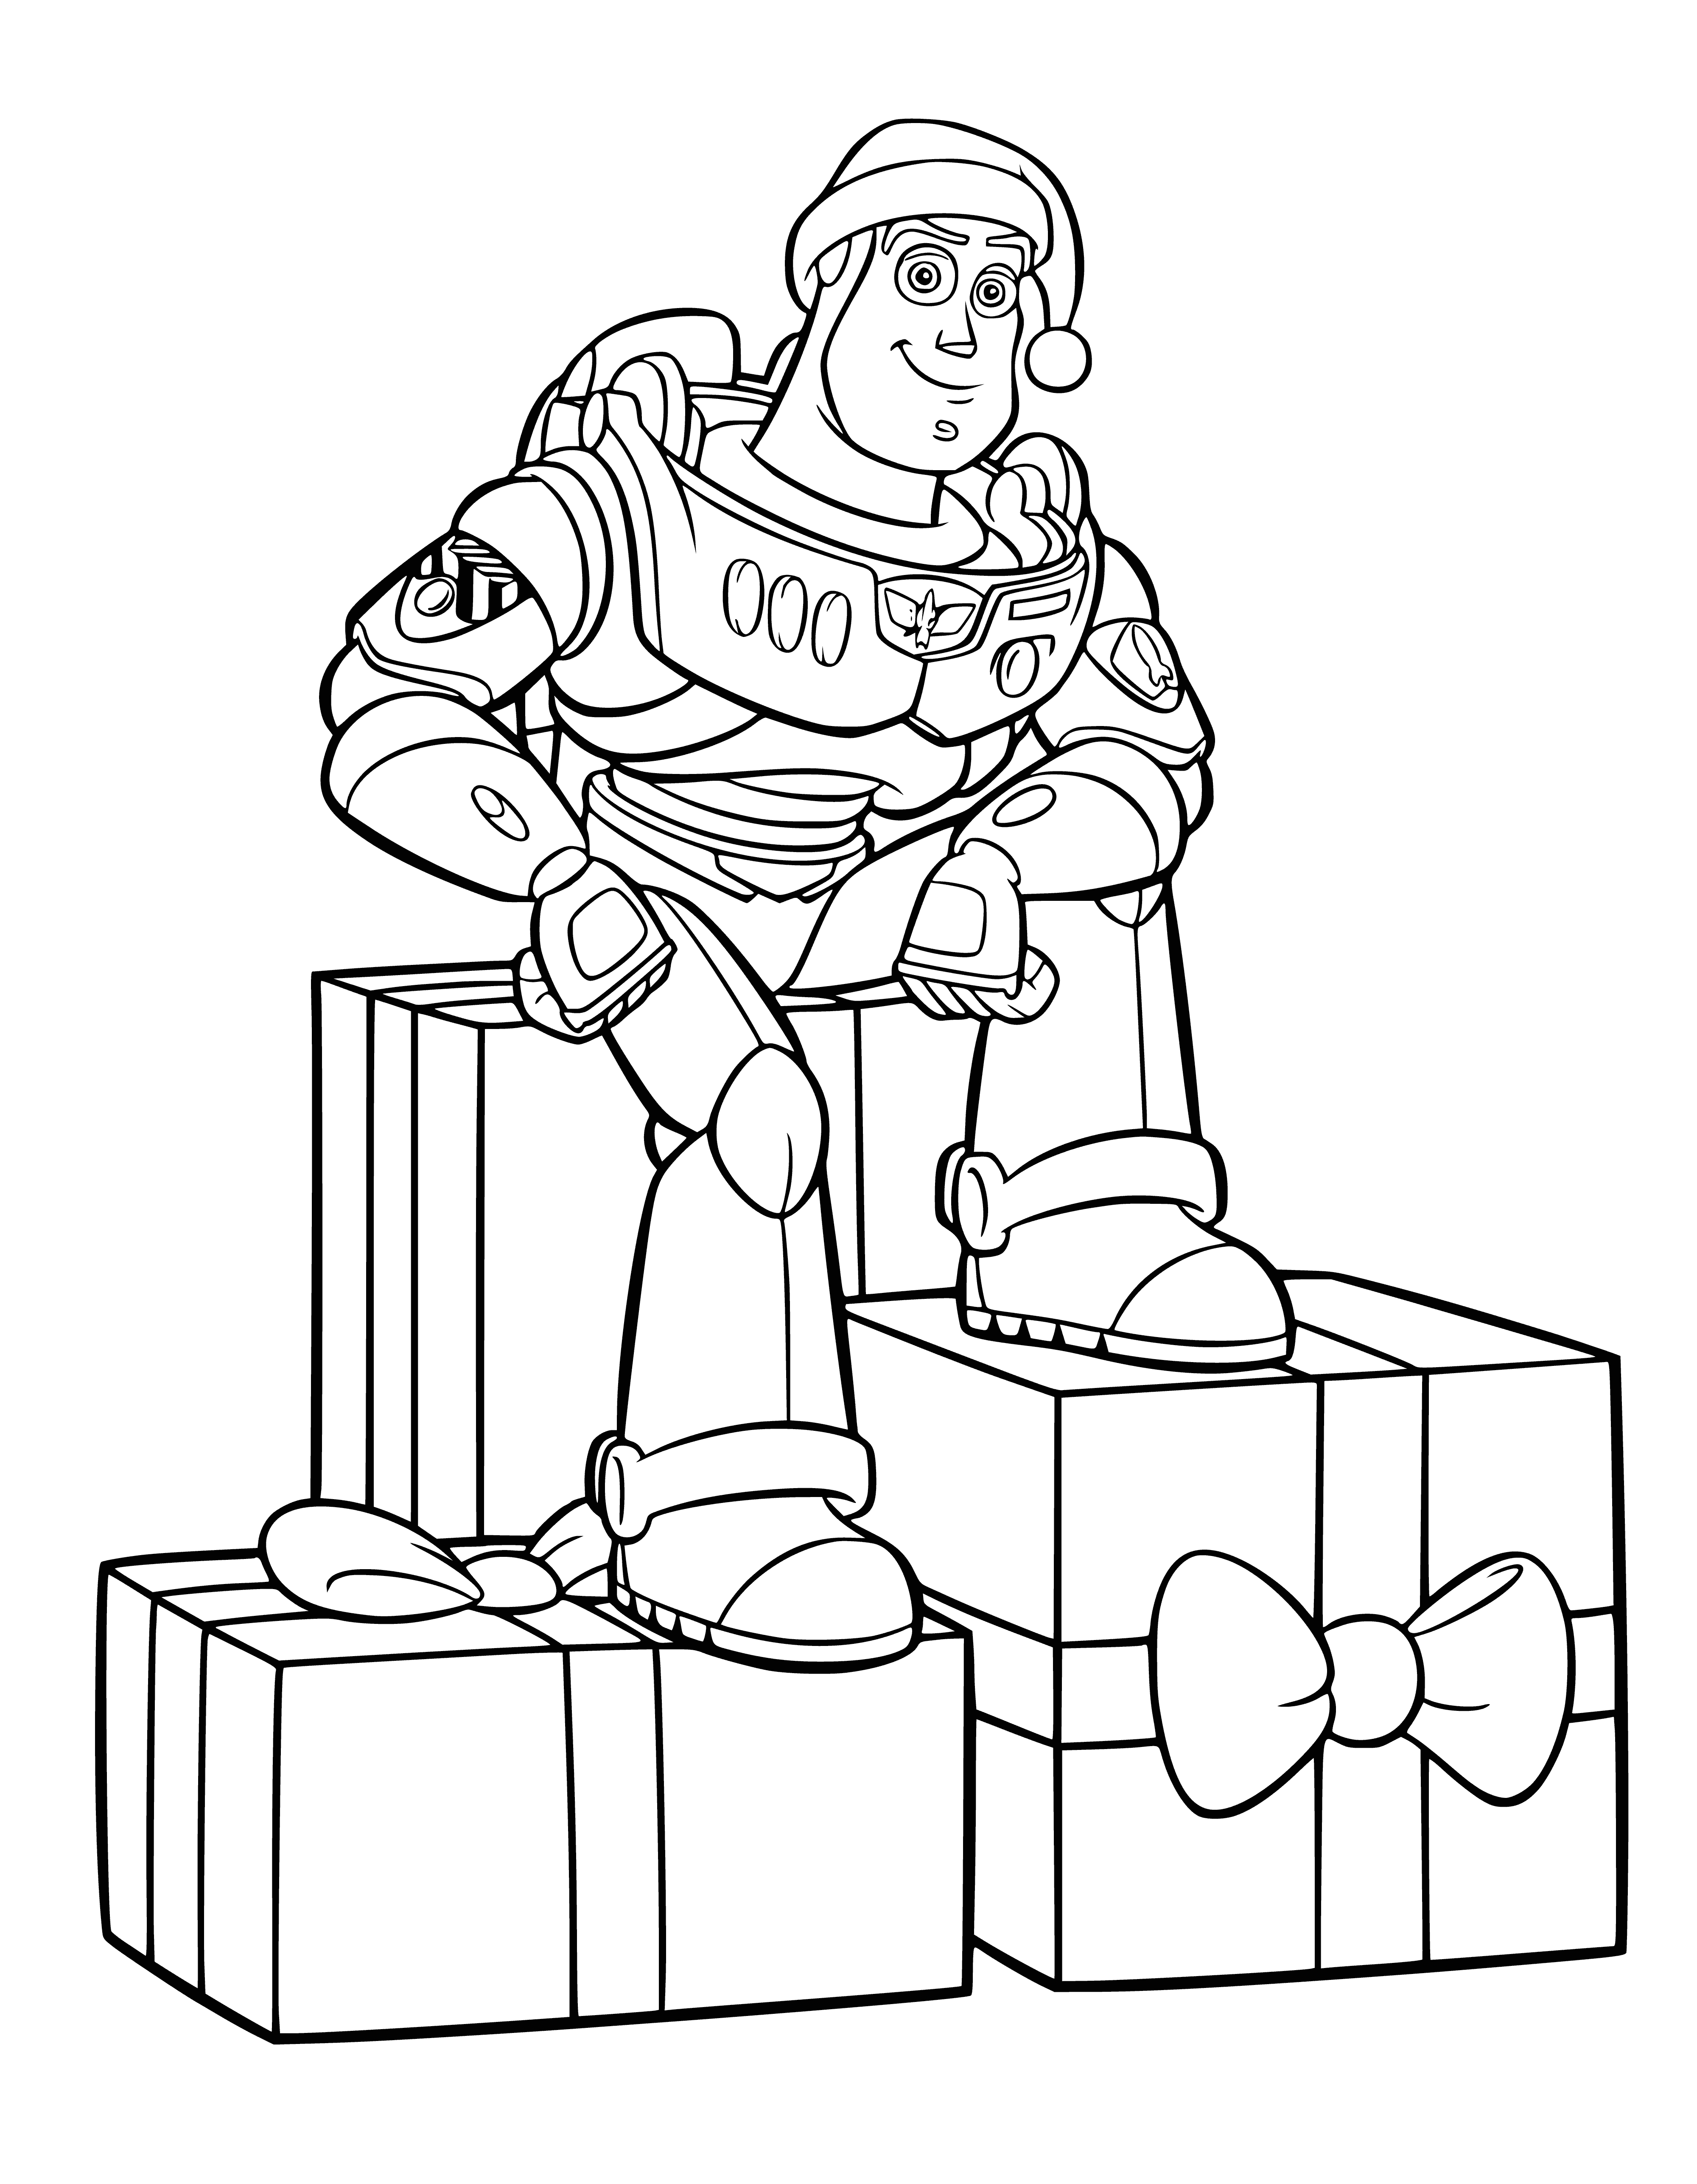 coloring page: Disney characters celebrating New Year with gifts. Wearing festive clothing, they all look excited for a fun and memorable New Year.